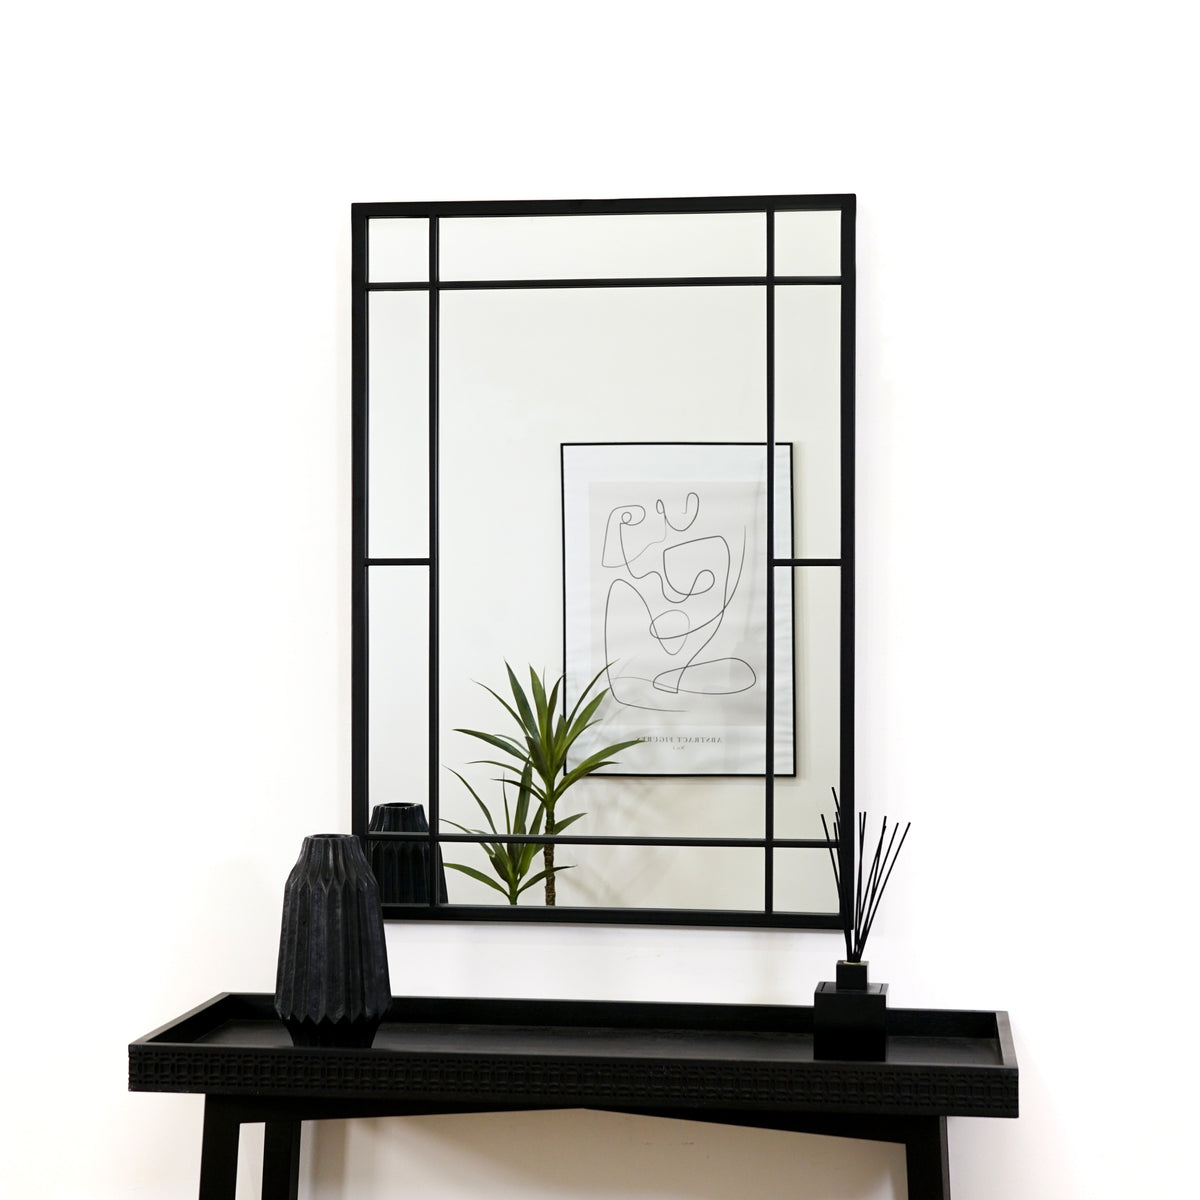 Black industrial rectangular metal mirror displayed above console table